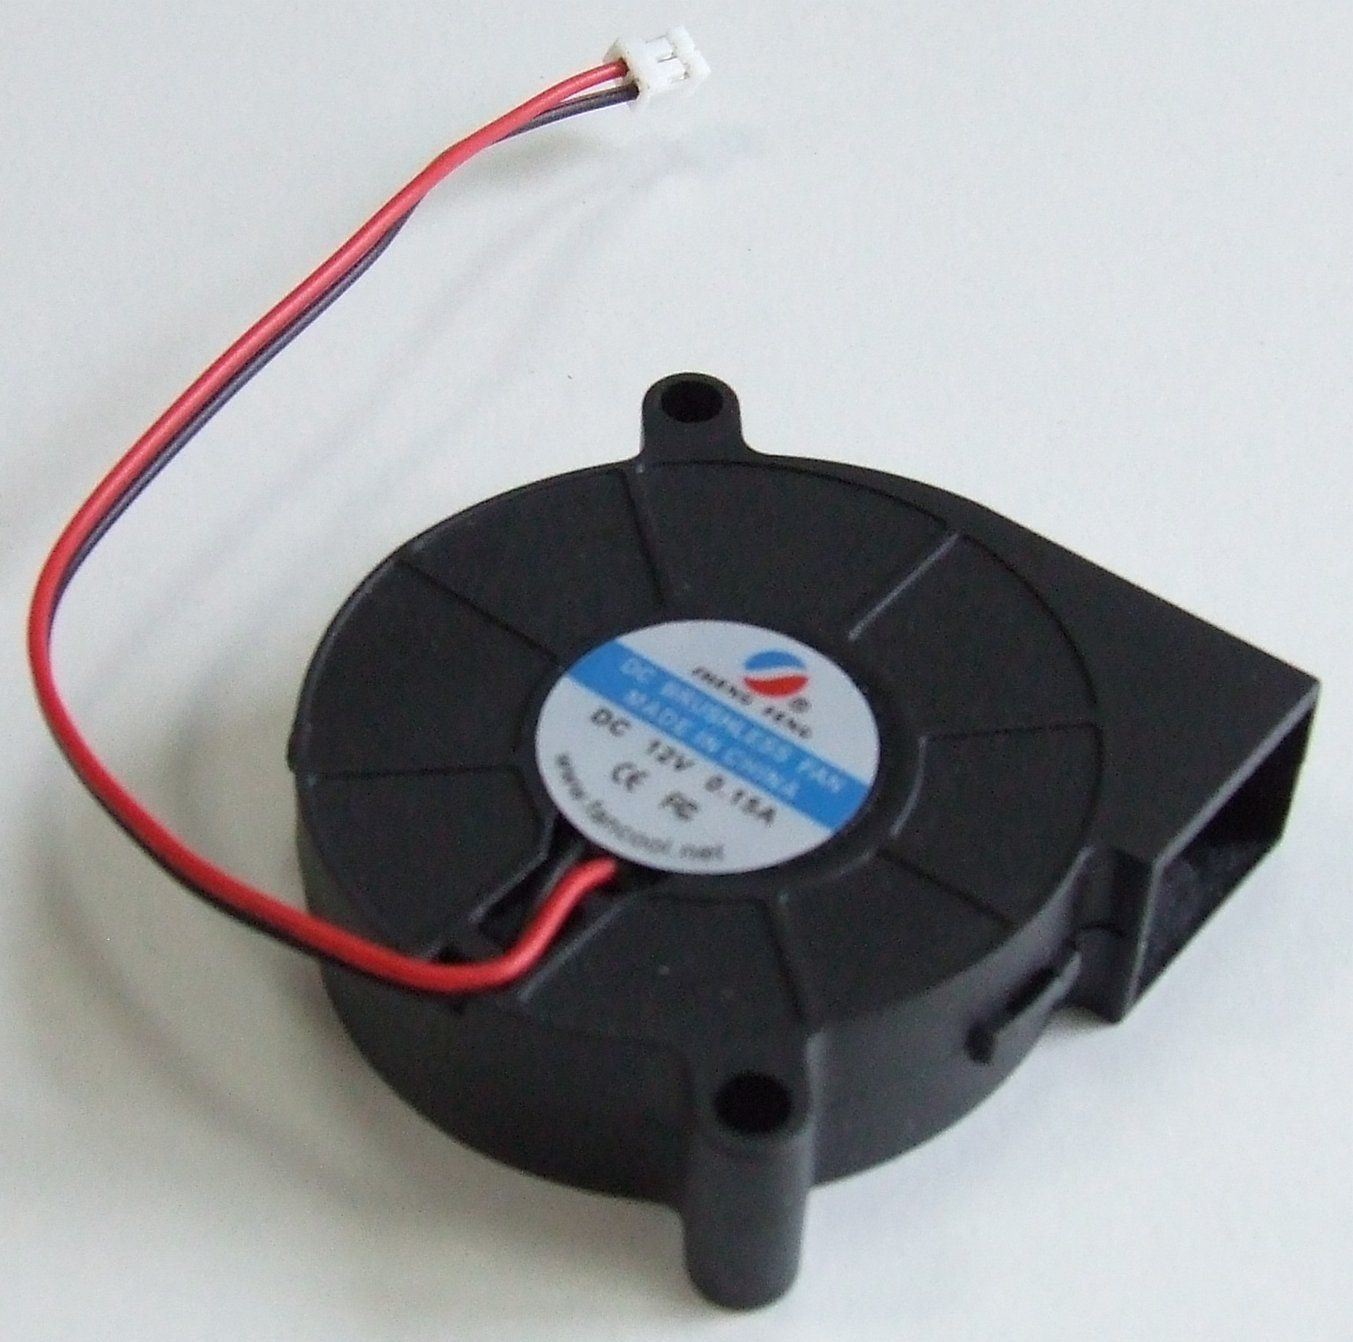 FAN WITH TANGENTIAL PUSH 12 VOLTS 0.15 A